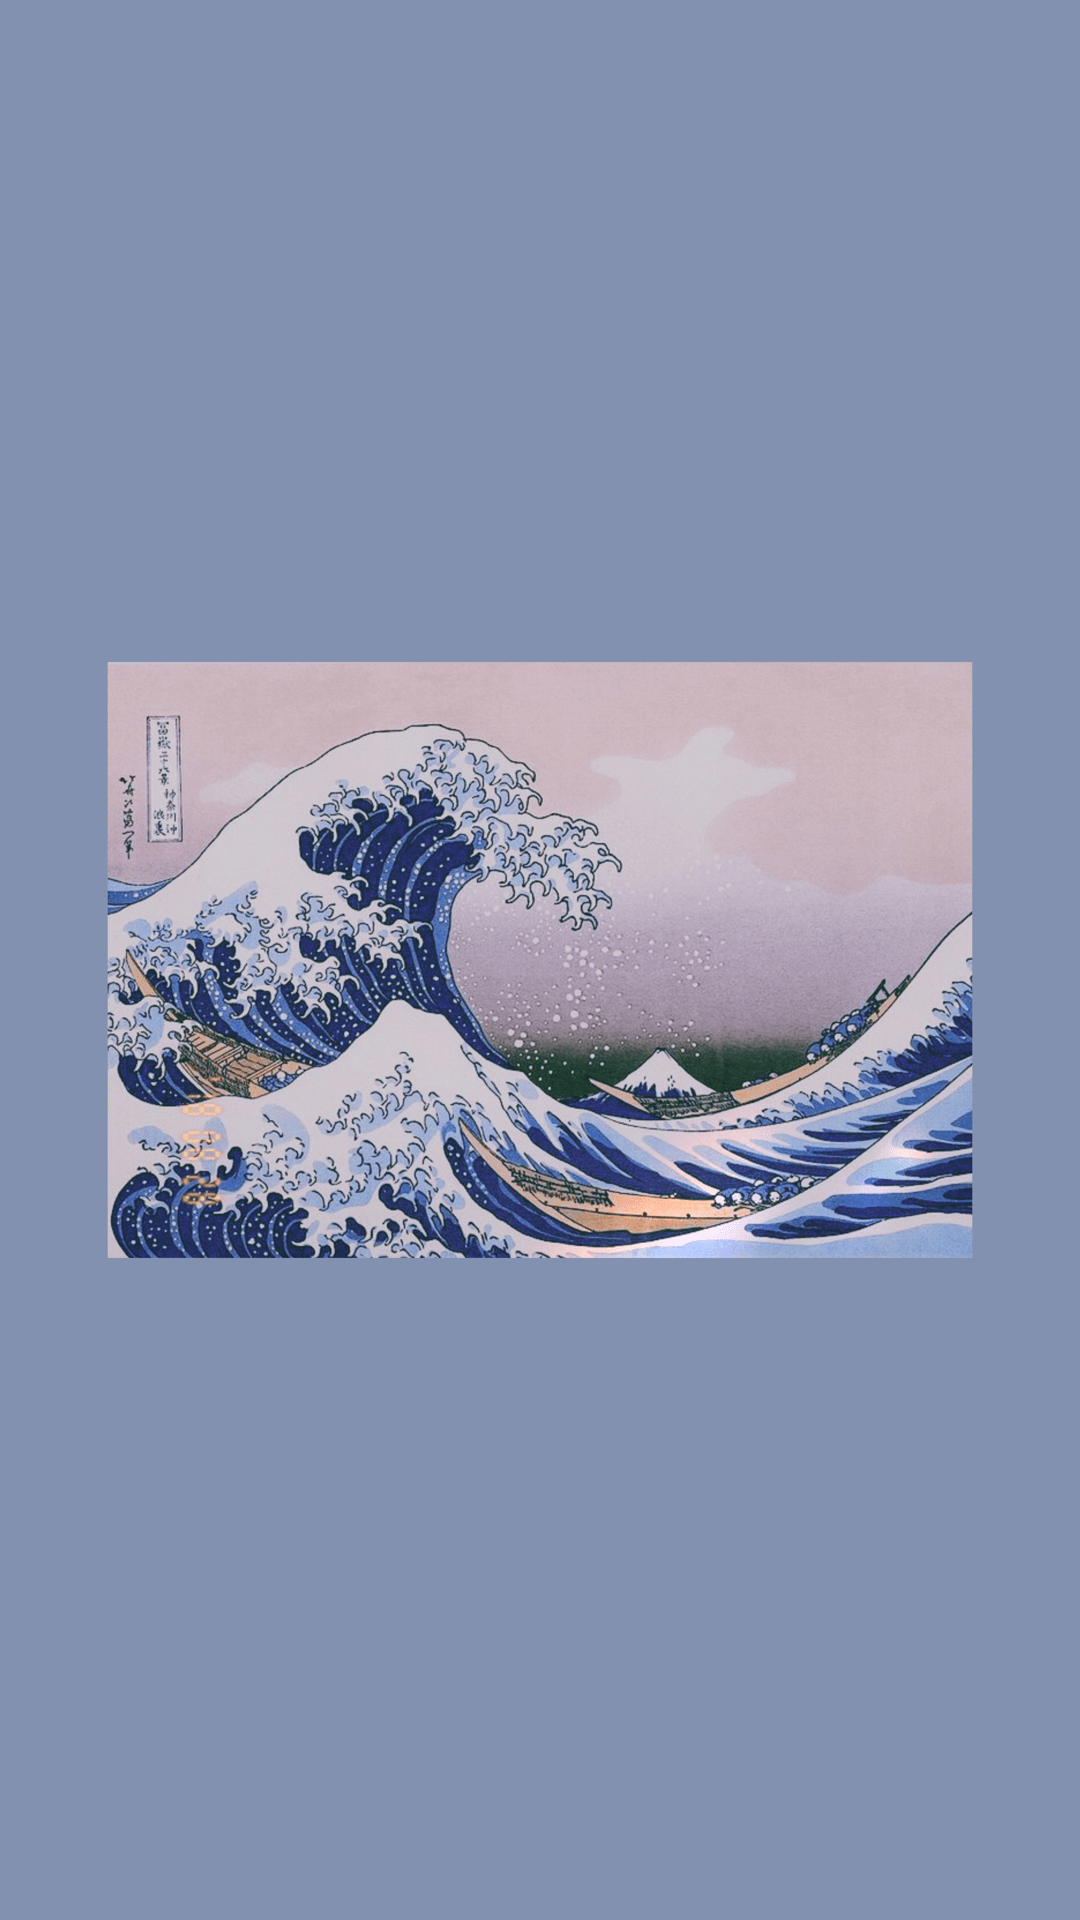 Aesthetic phone wallpaper of the great wave - Wave, The Great Wave off Kanagawa